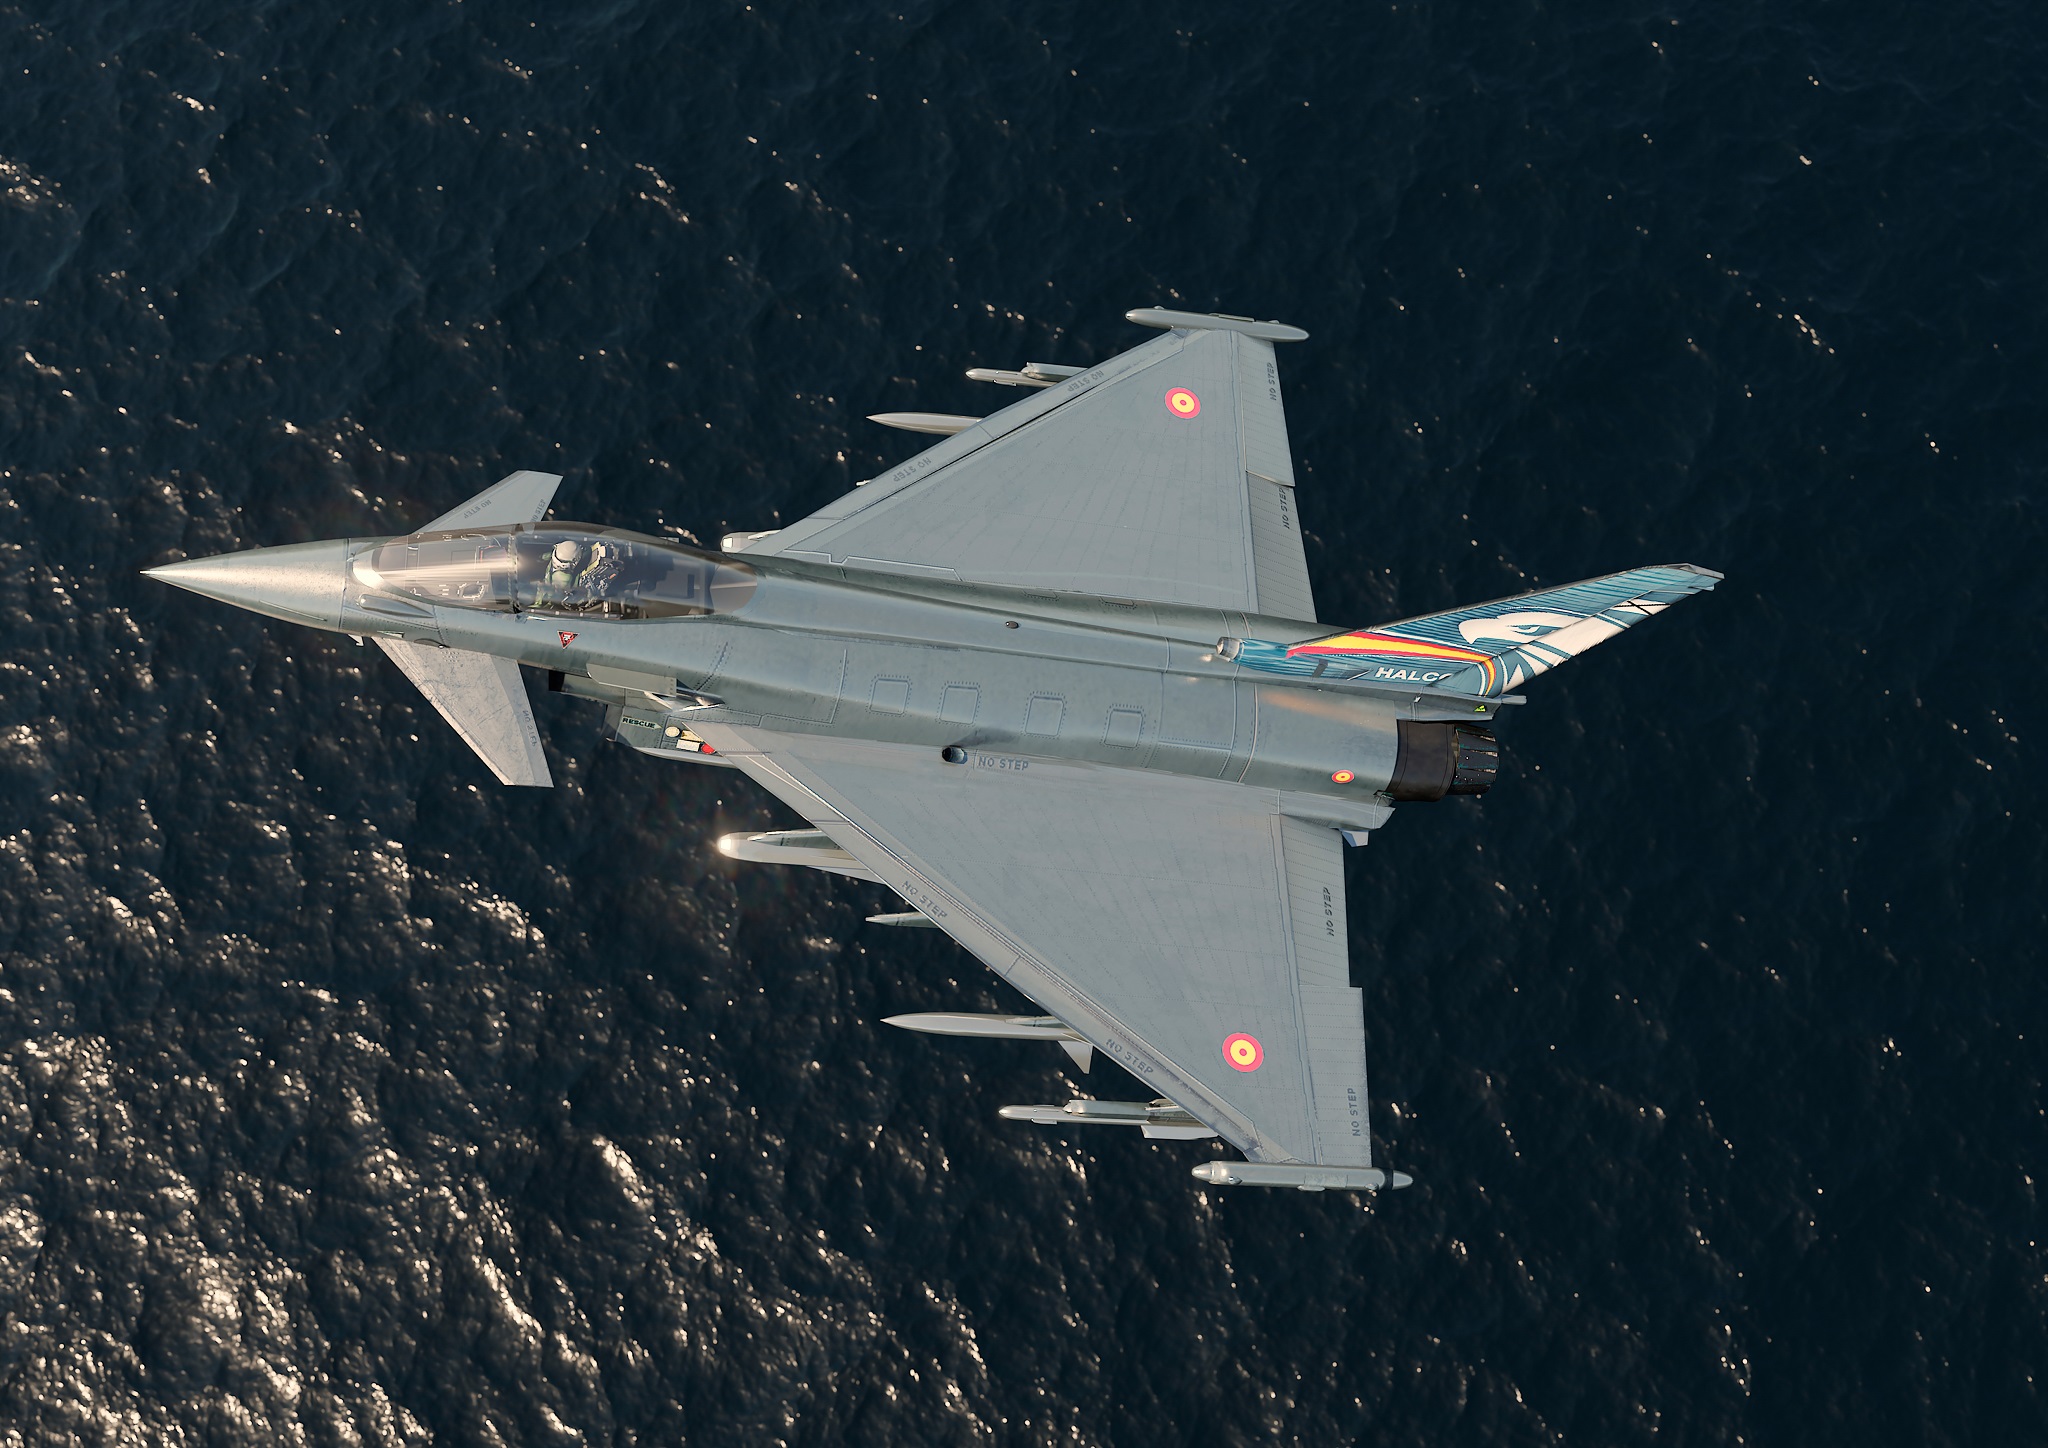 Spain Orders 20 Eurofighter Jets Under Landmark Contract to Modernise its Combat Aircraft Fleet